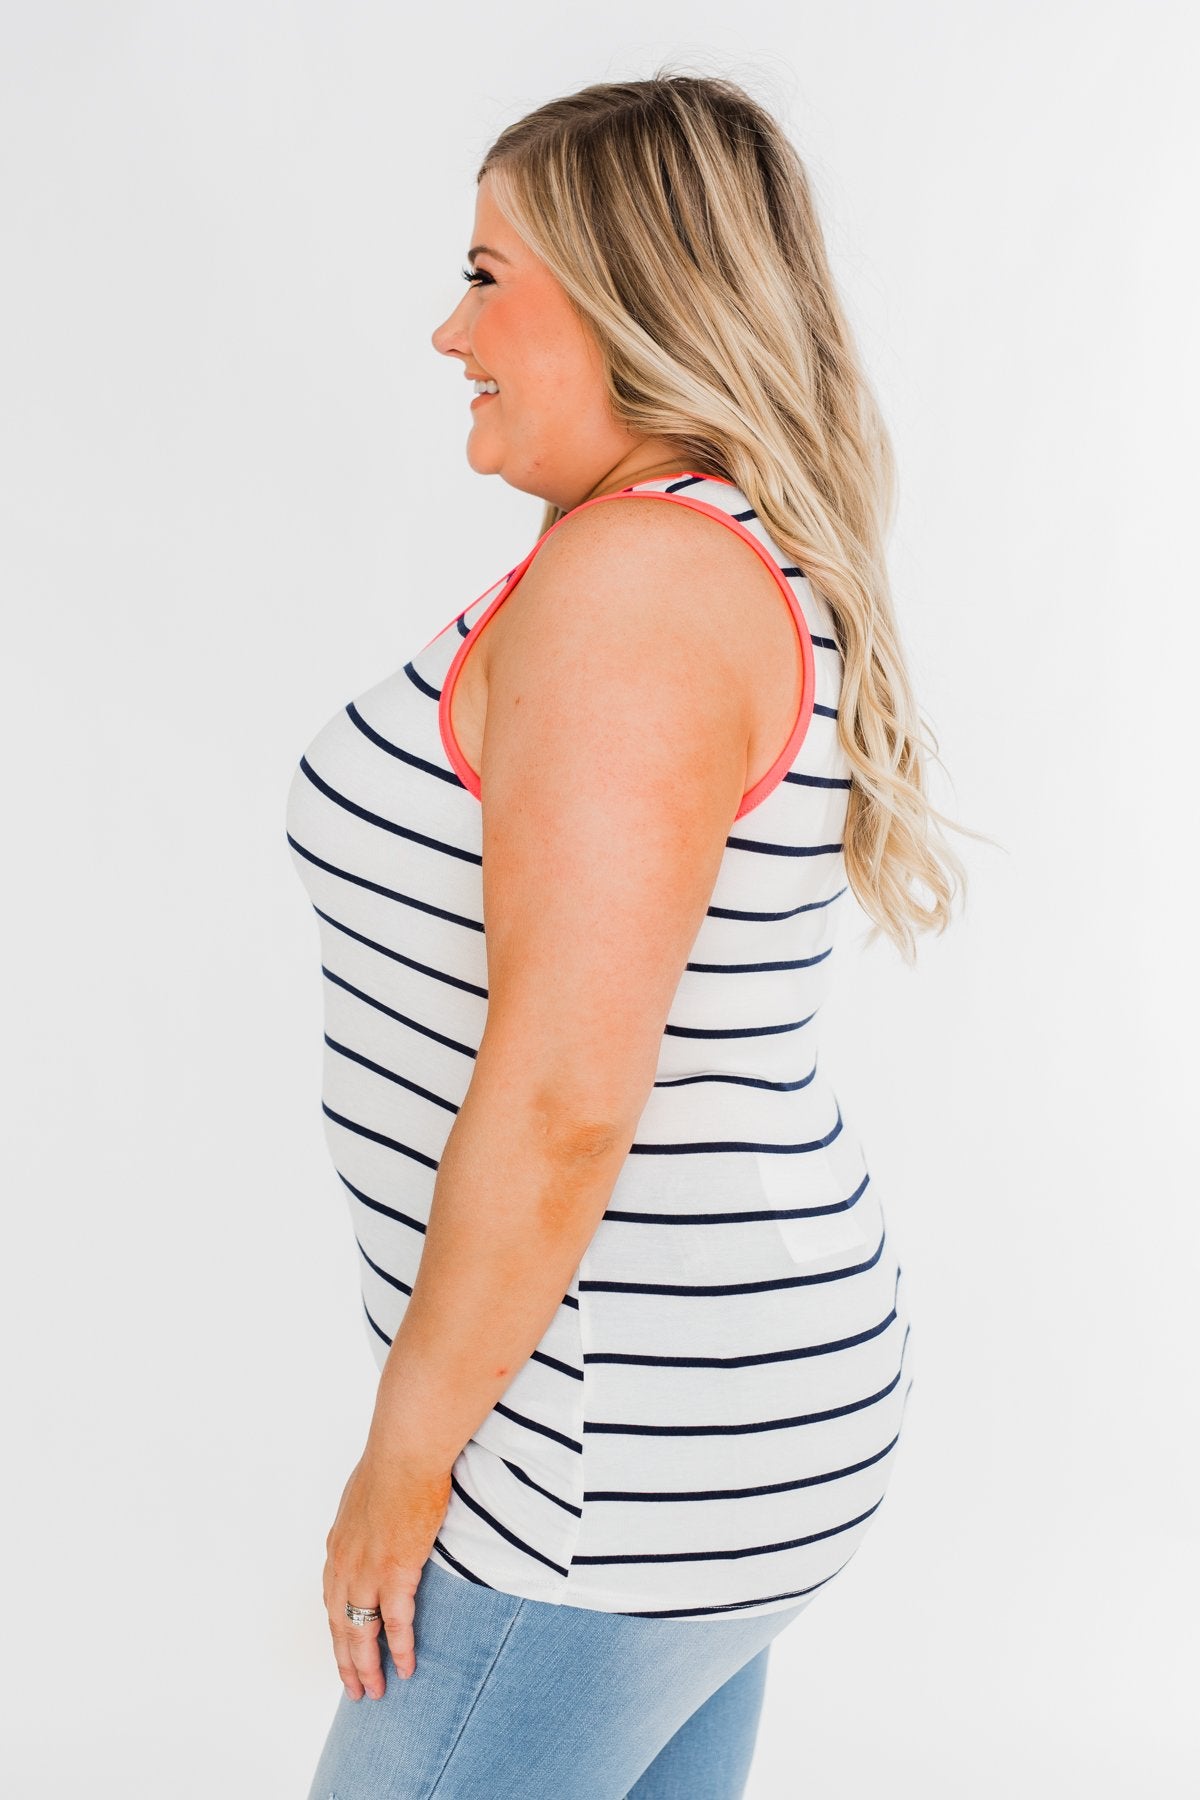 Only For Tonight Striped Tank Top- Navy & Pink